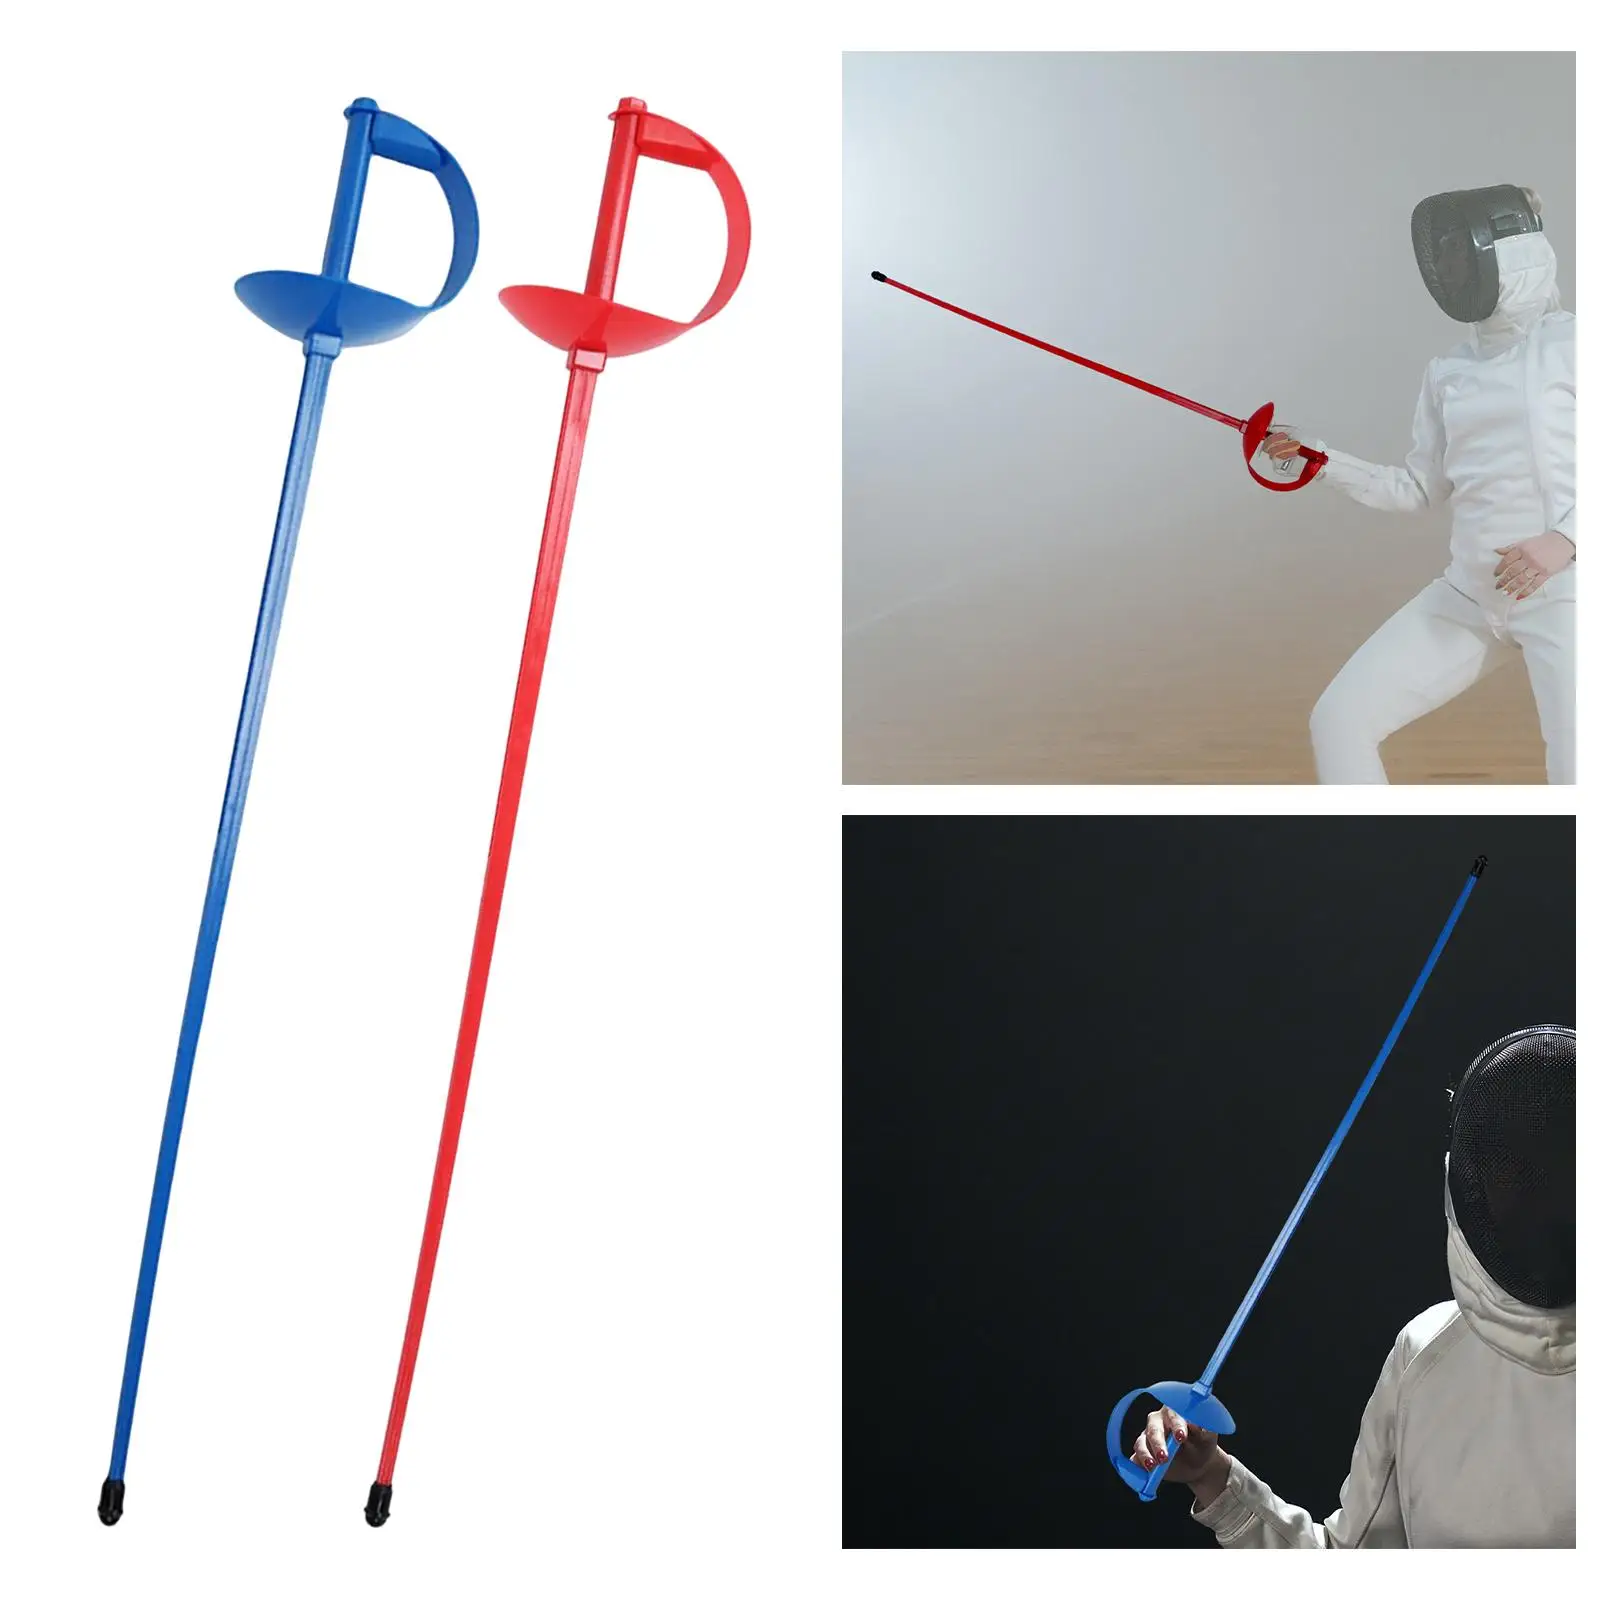 Child Fencing Saber with Sound for Beginners Collision Sensing Girls Boys Training Gear Fencing Toy Portable Sparring Play Sword